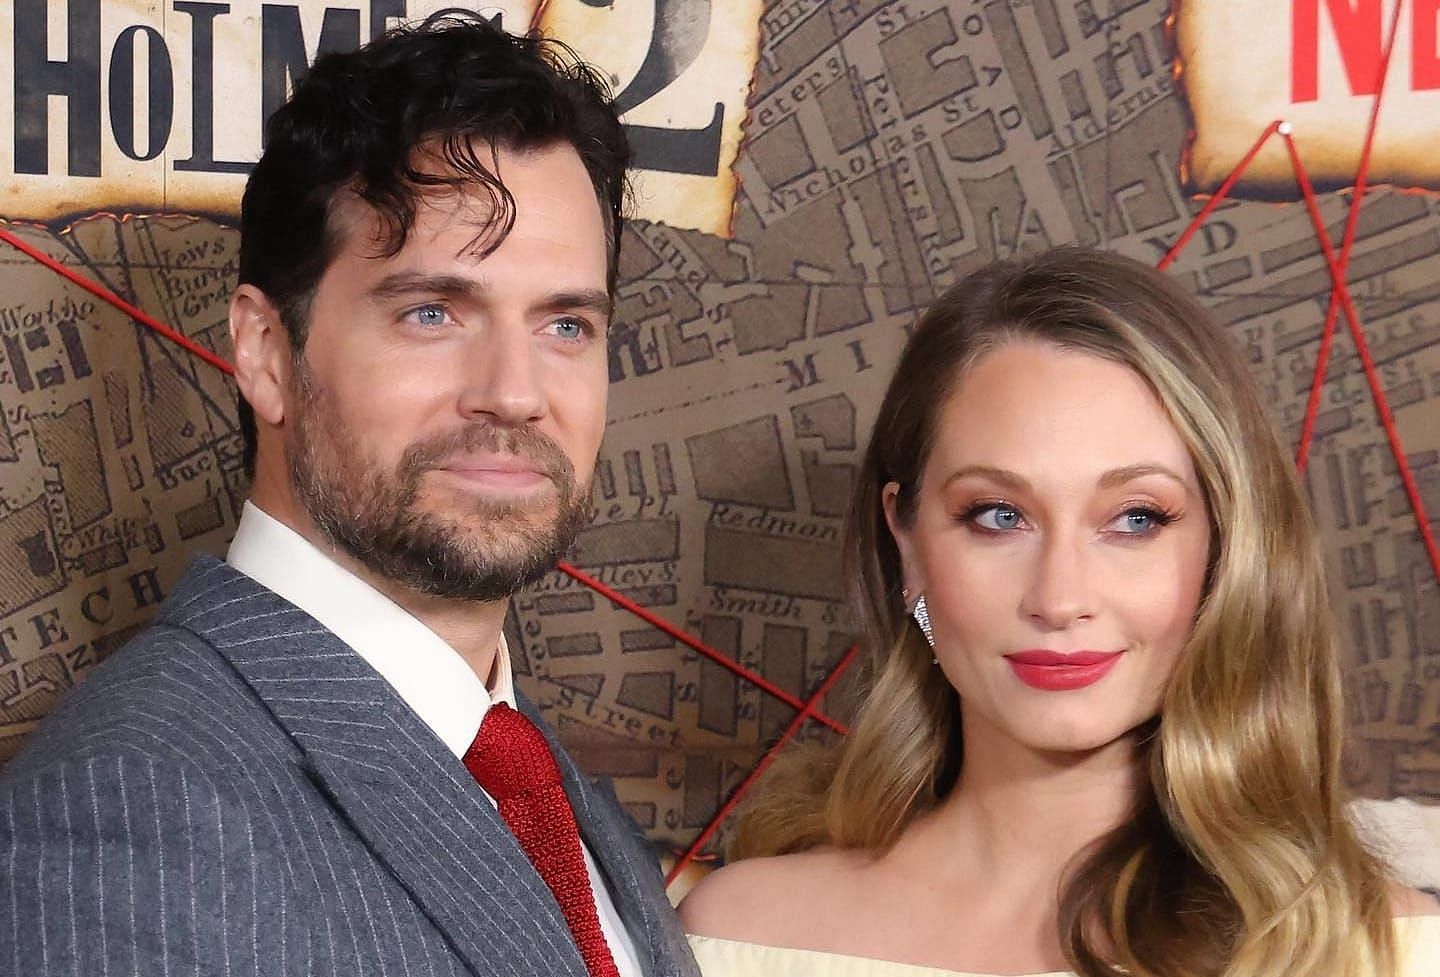 Who Is Henry Cavill Dating Now 2023? Girlfriend, Wife, Is He